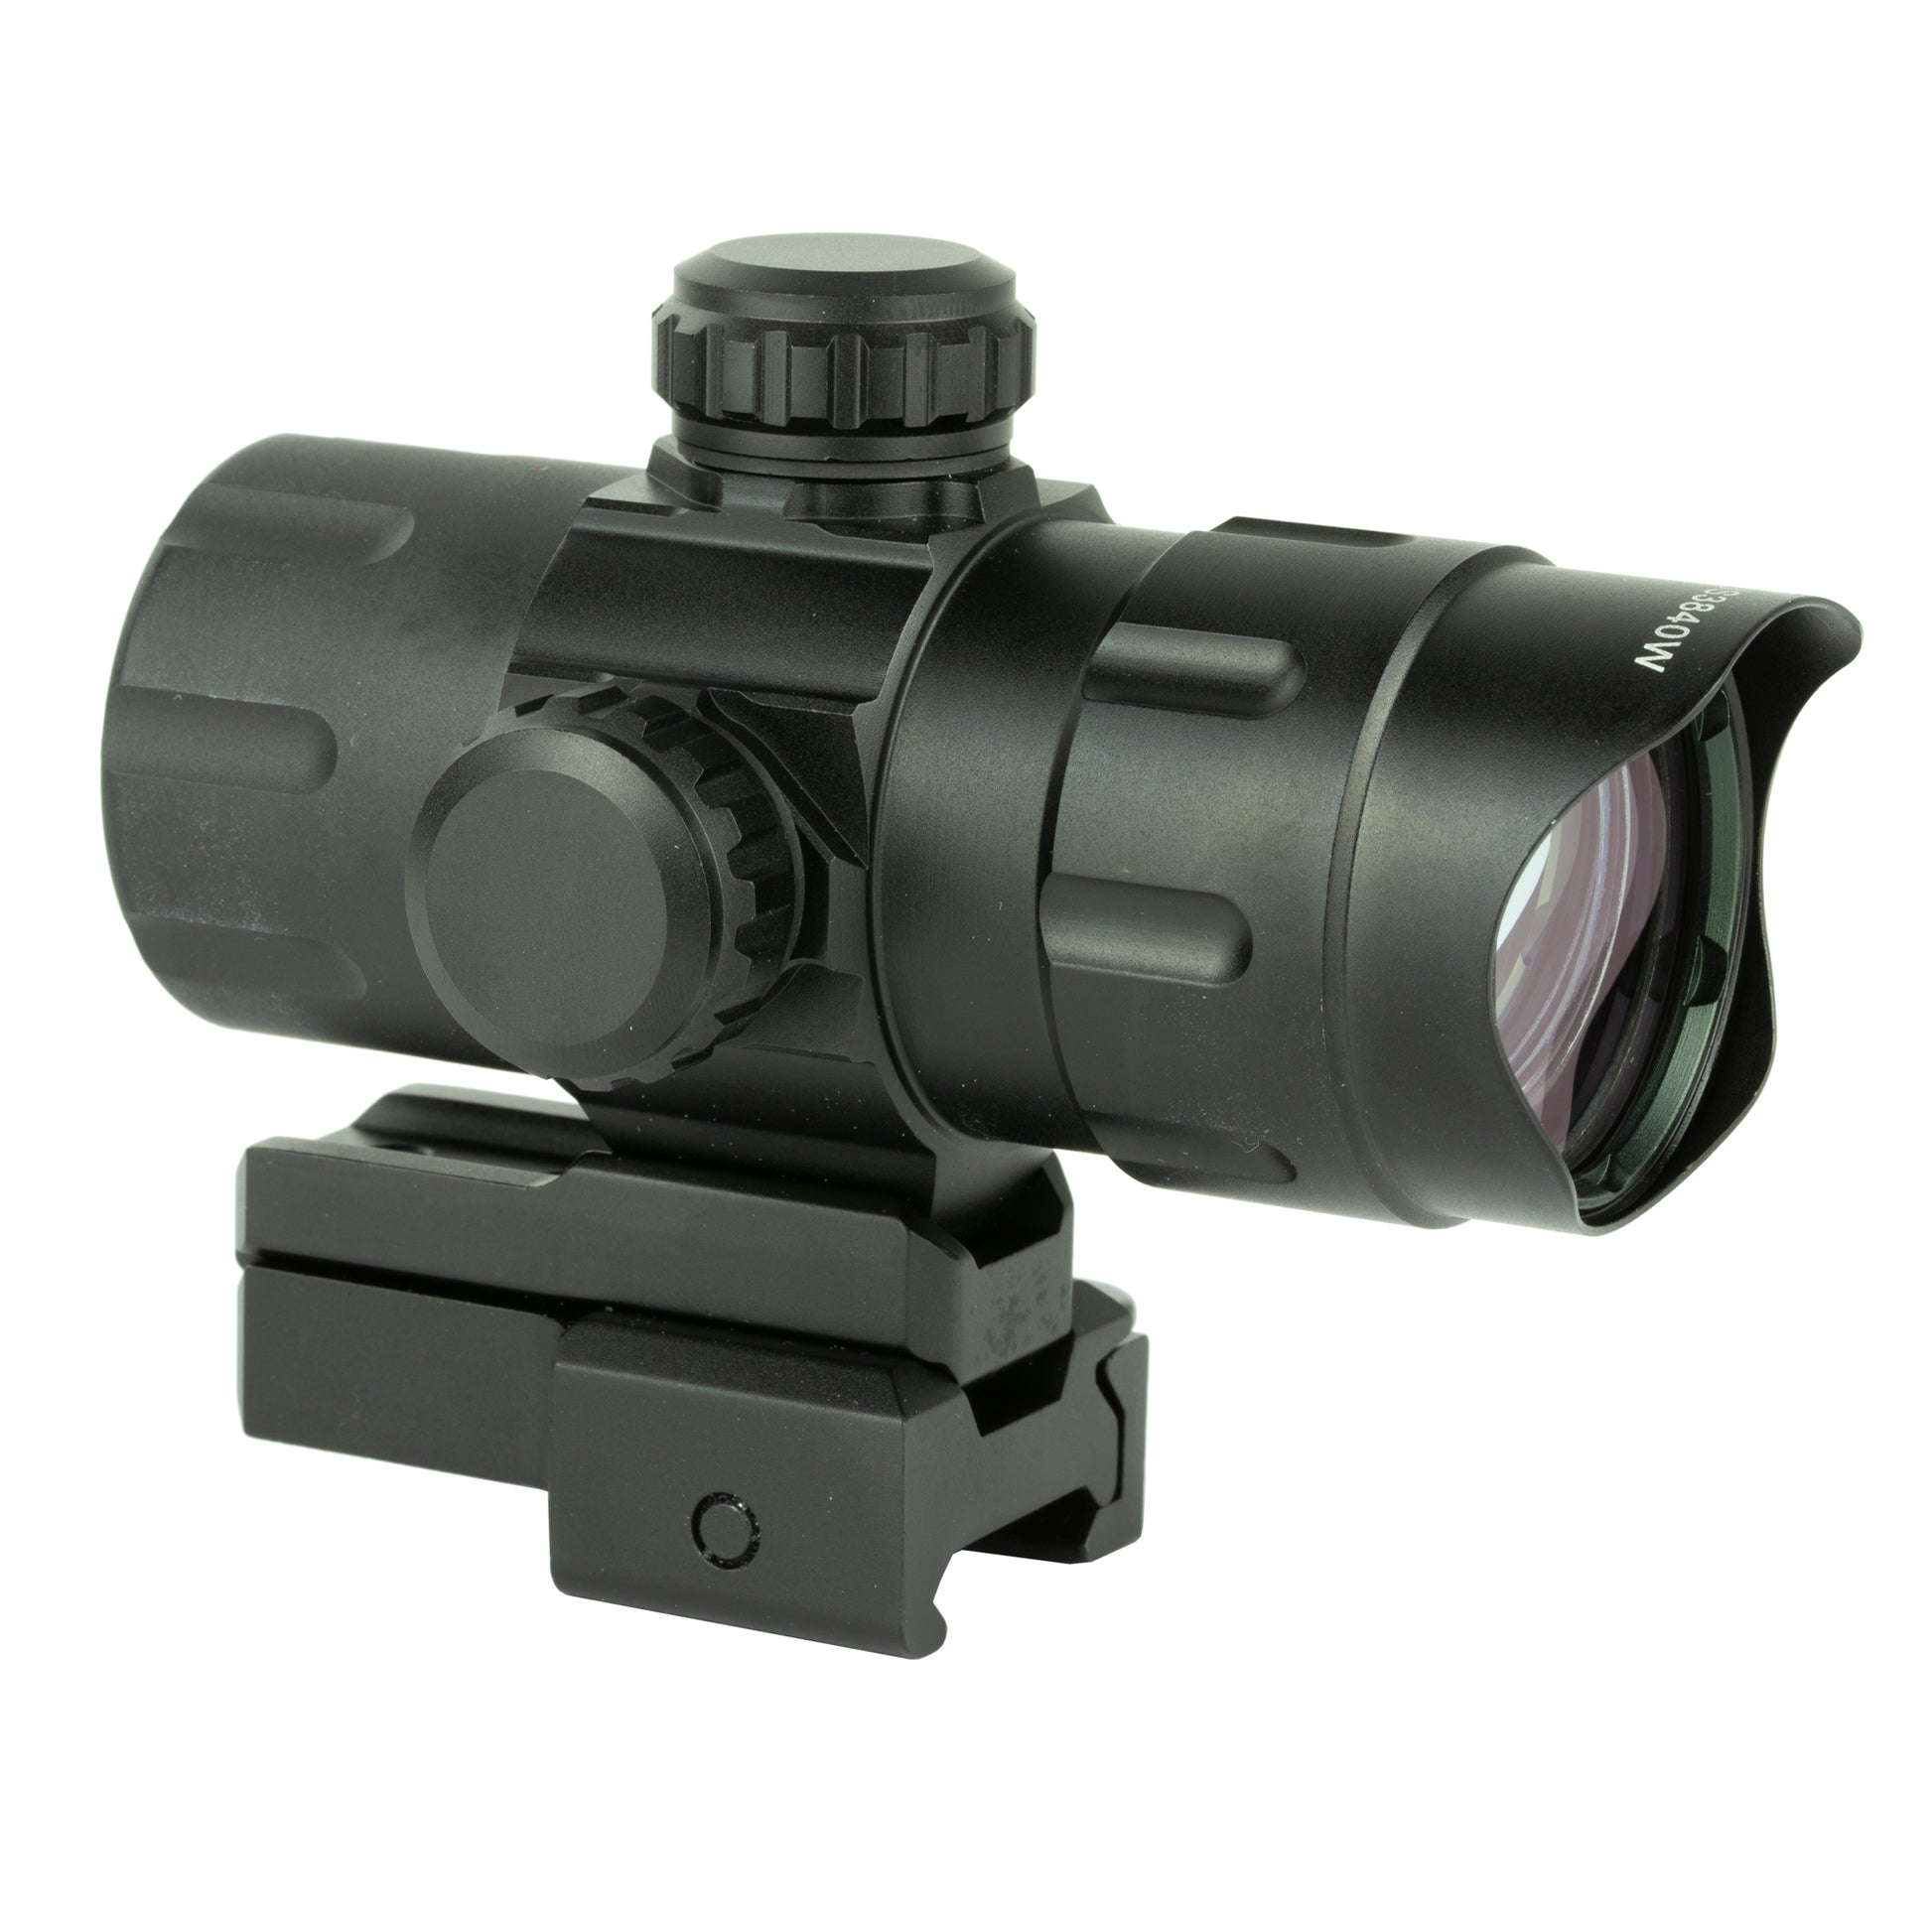 Leapers Inc UTG Instant Target Aiming 4.2" Red/Green CQB QD Mount SCP-DS3840W - California Shooting Supplies